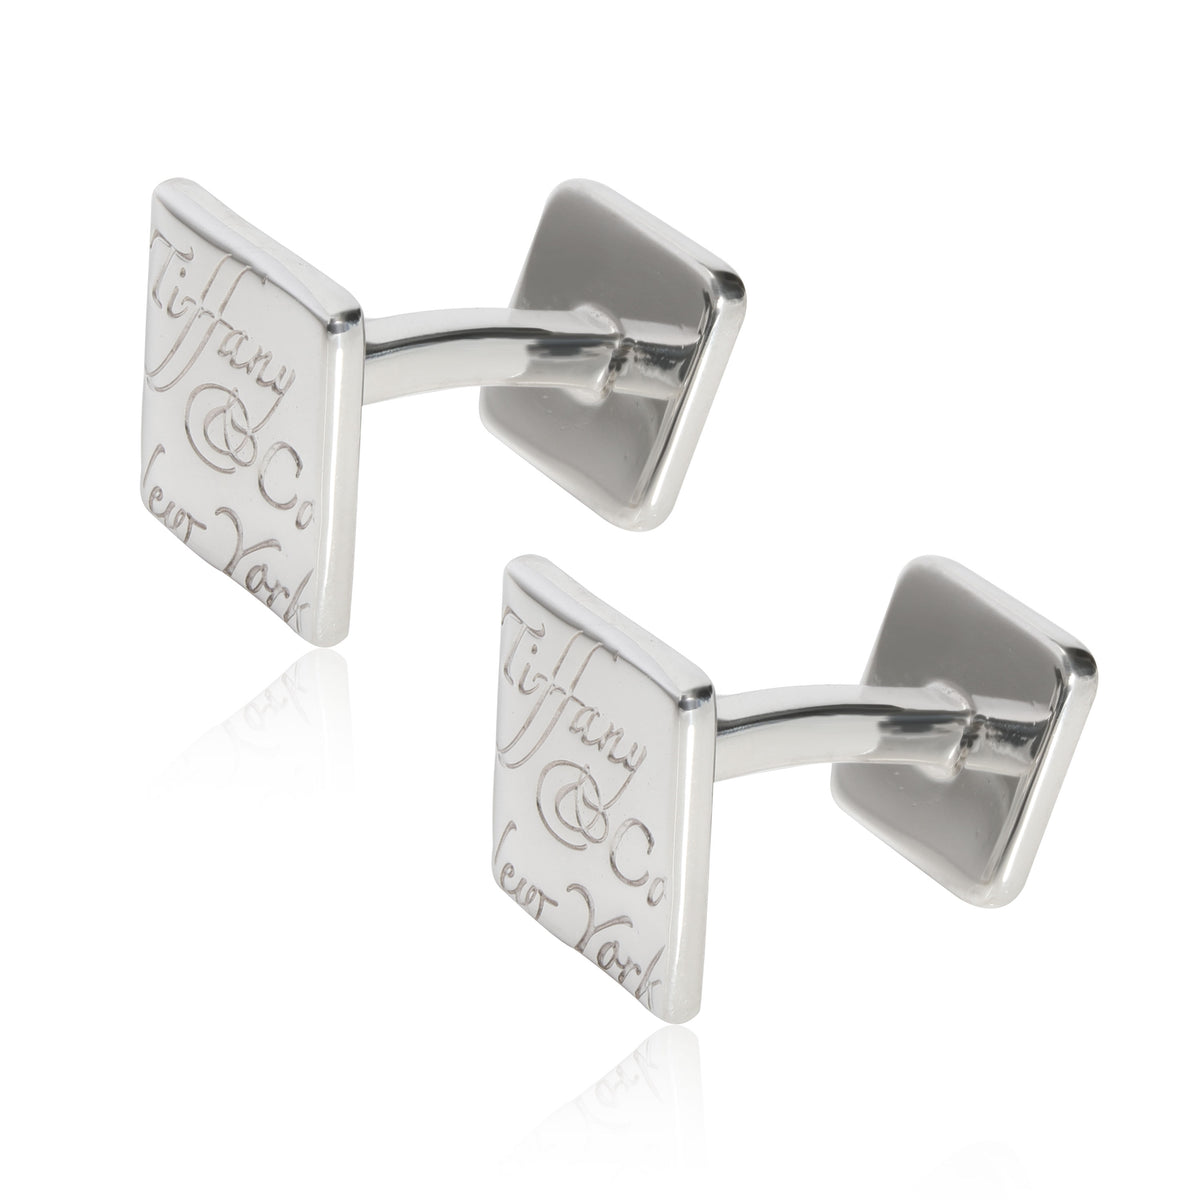 Tiffany & Co. Notes Cufflinks in  Sterling Silver